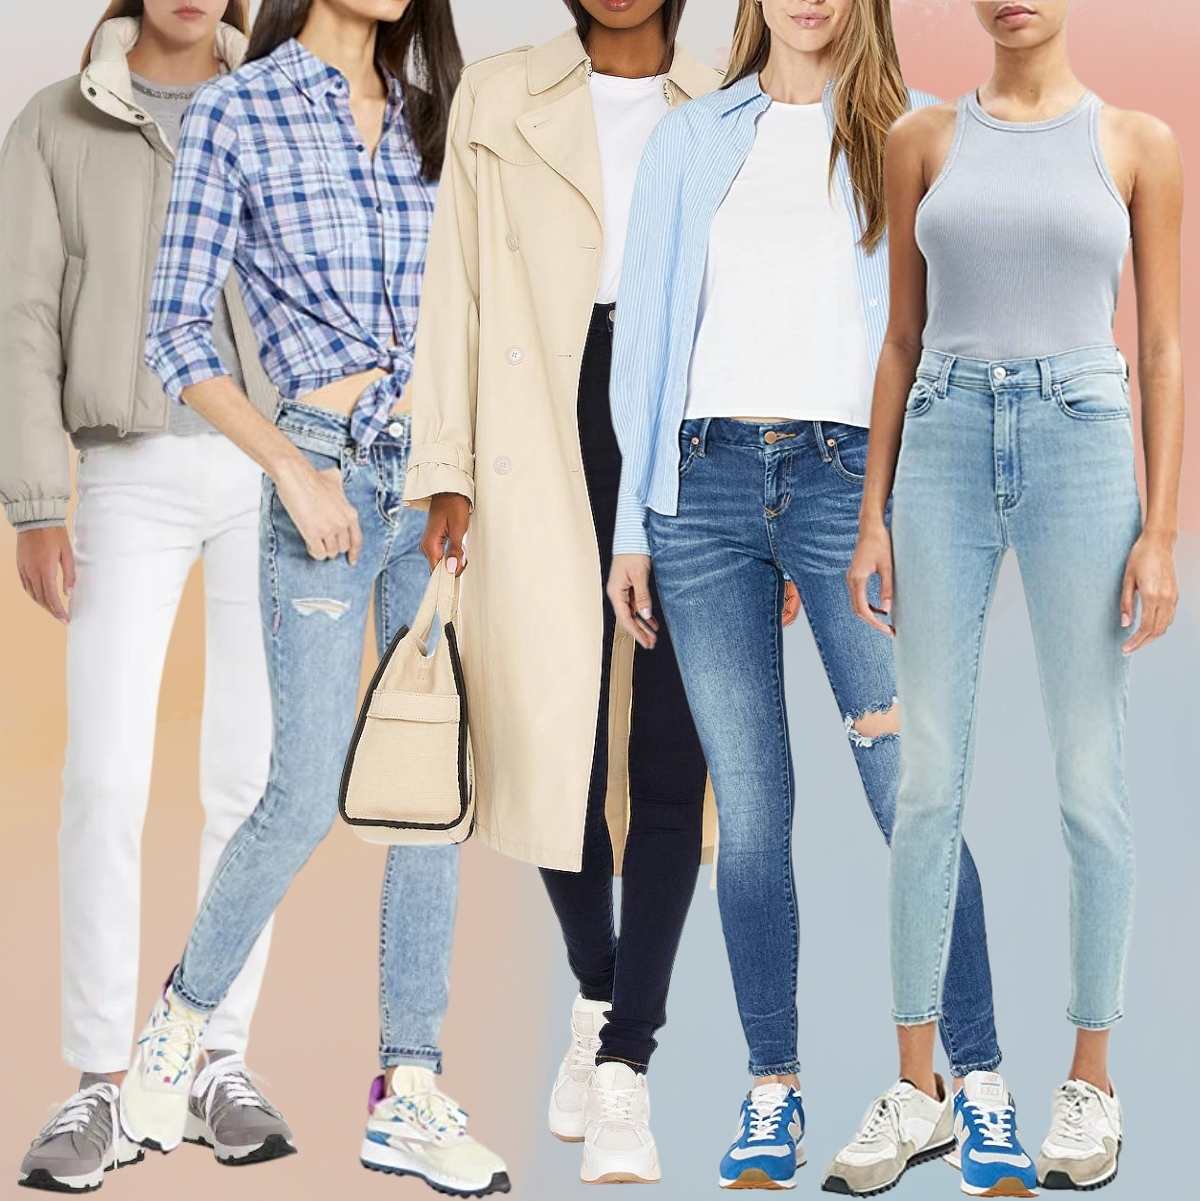 Collage of 5 women wearing retro sneakers with skinny jeans outfits.